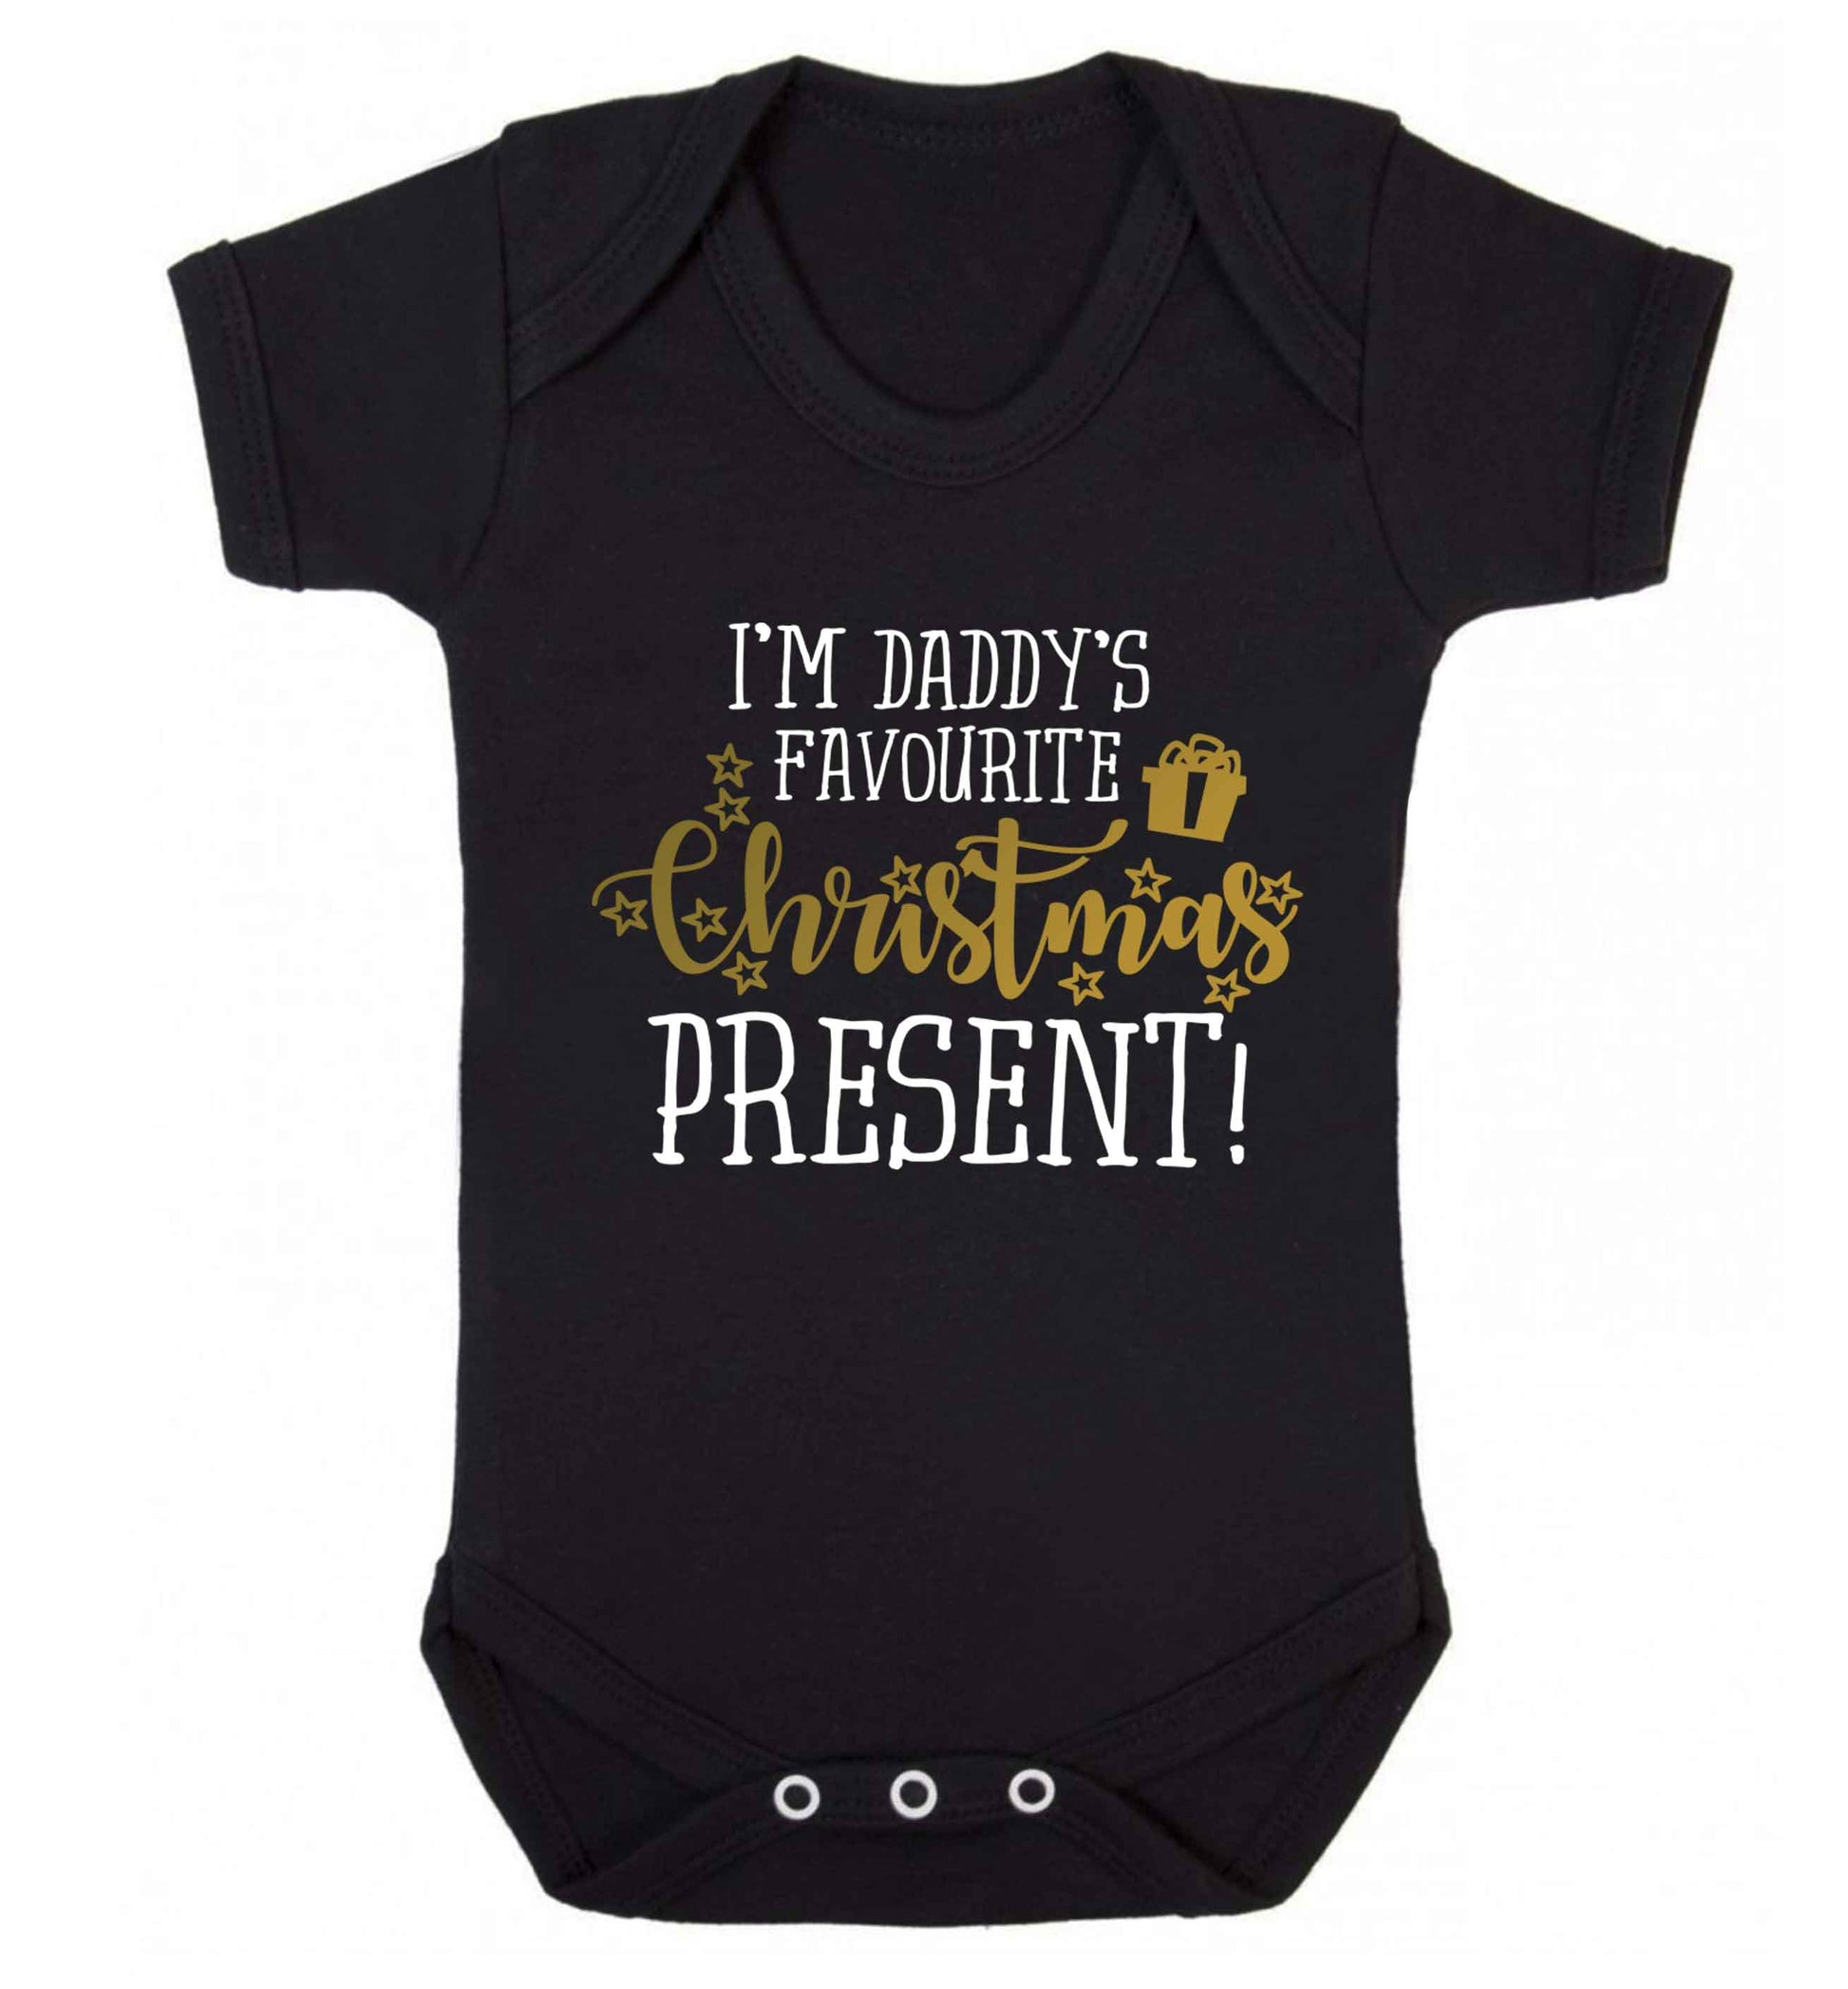 Daddy's favourite Christmas present Baby Vest black 18-24 months